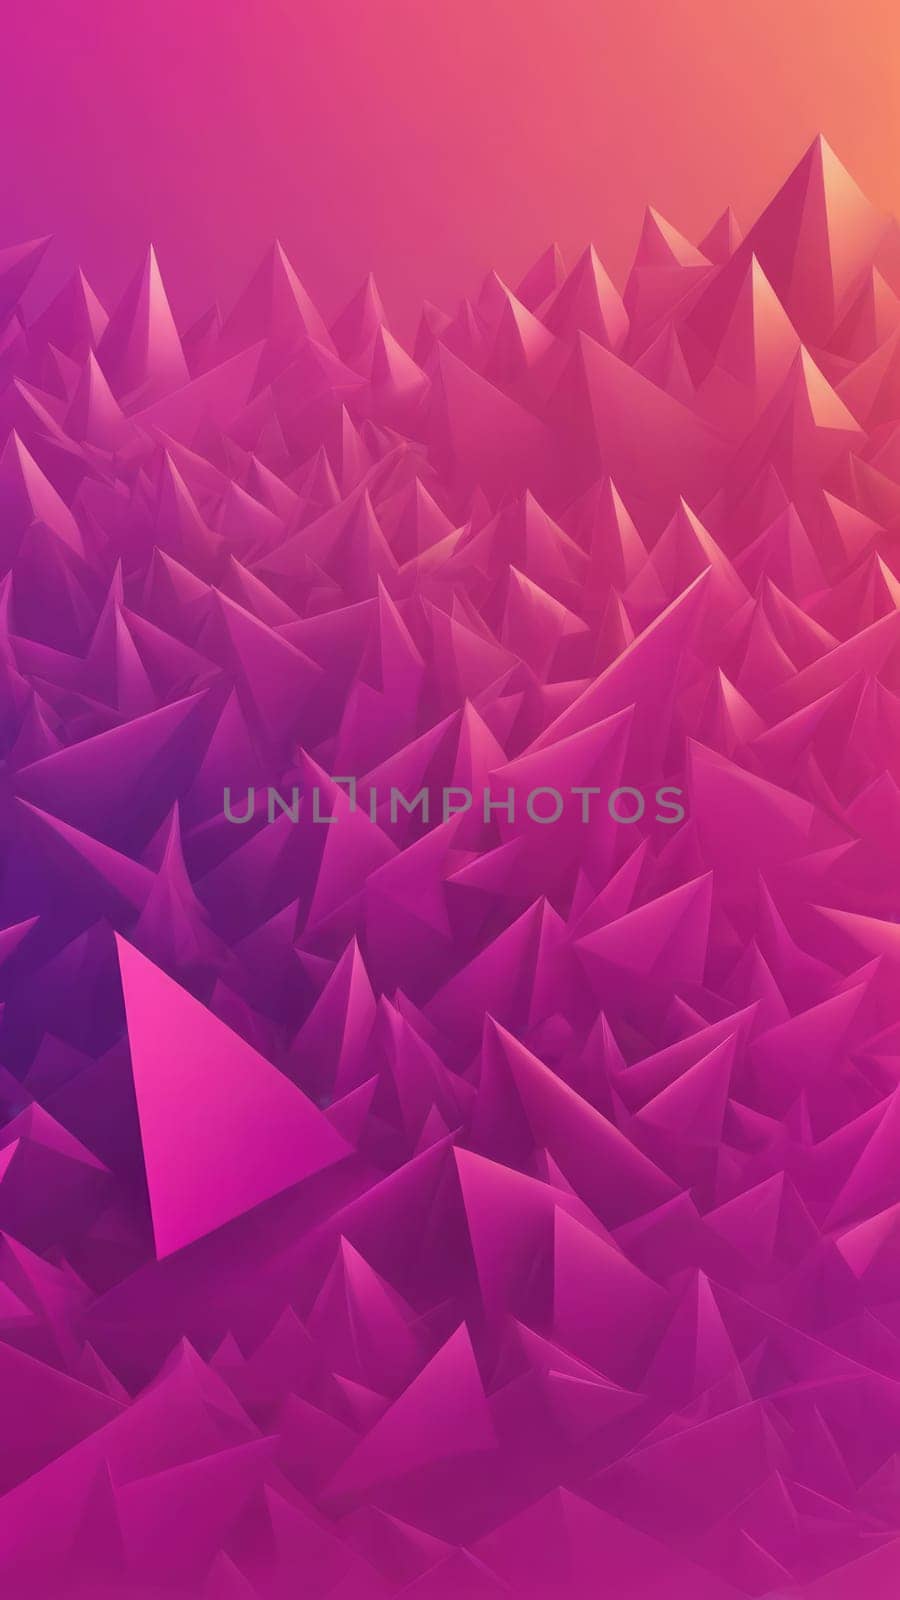 Art for inspiration from Spiked shapes and fuchsia by nkotlyar